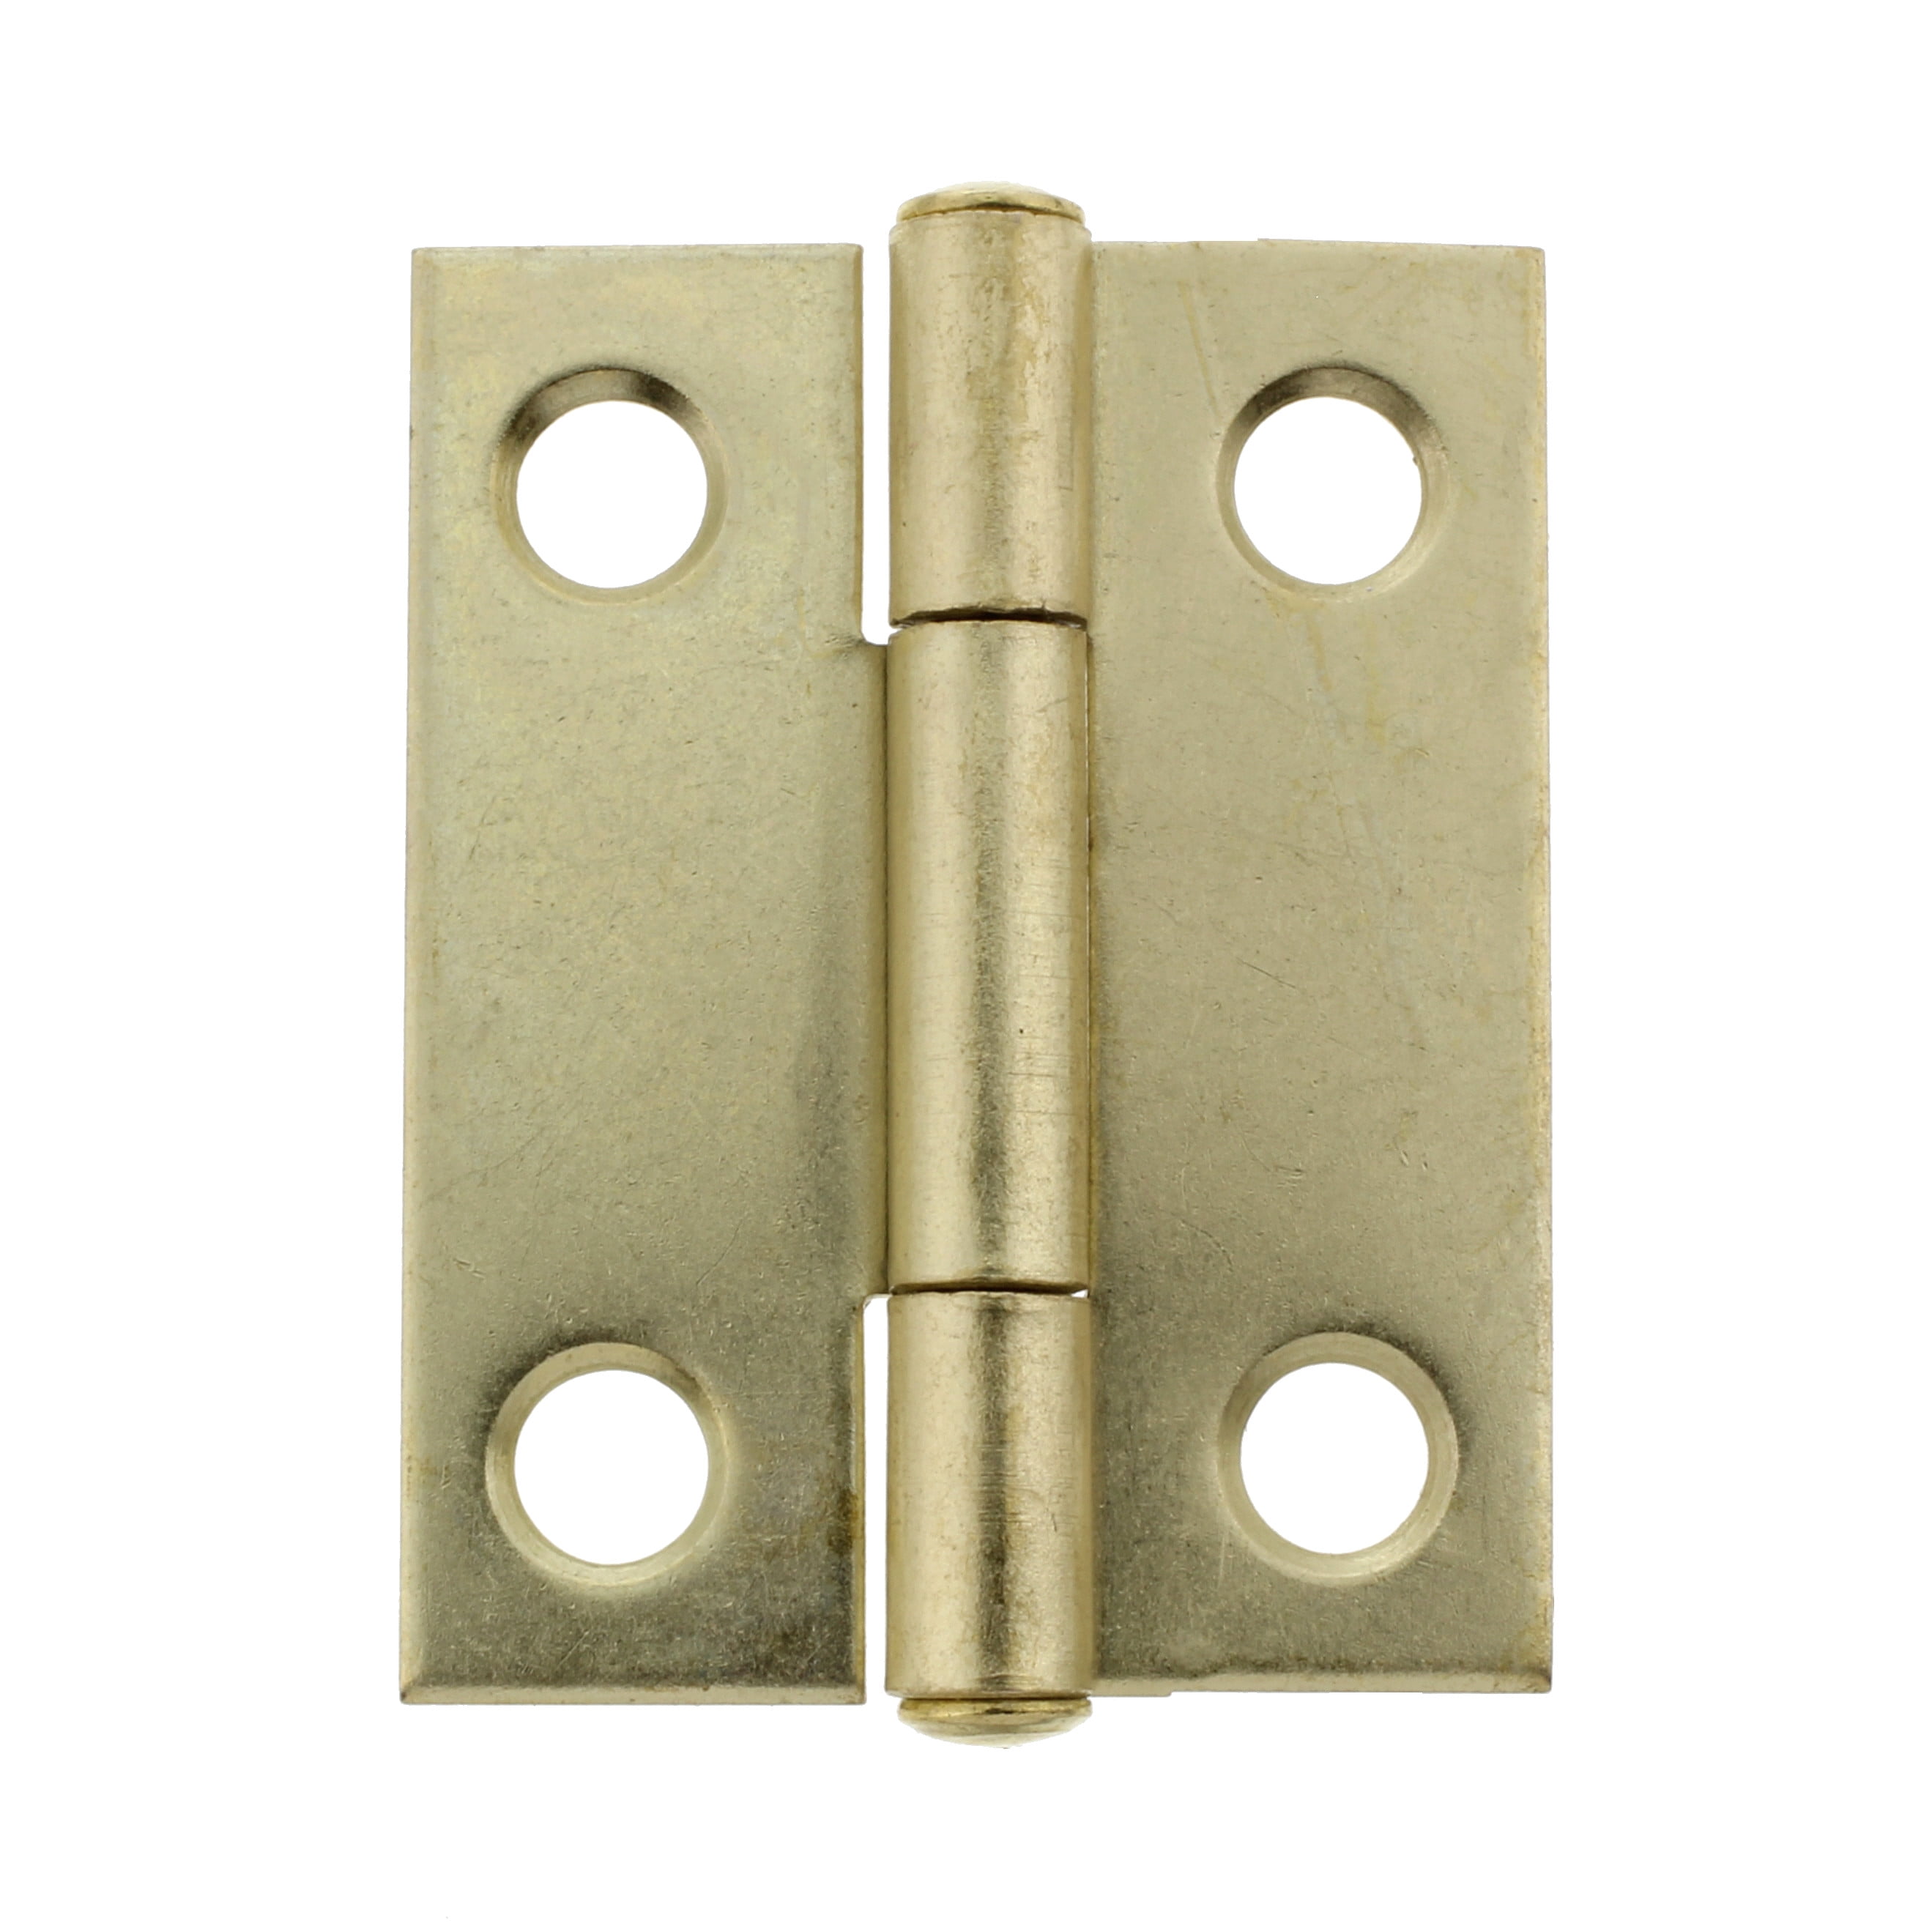 250pcs Metal Hinge with Screws Mini Small Useful Spring Hinge for Wooden Box 